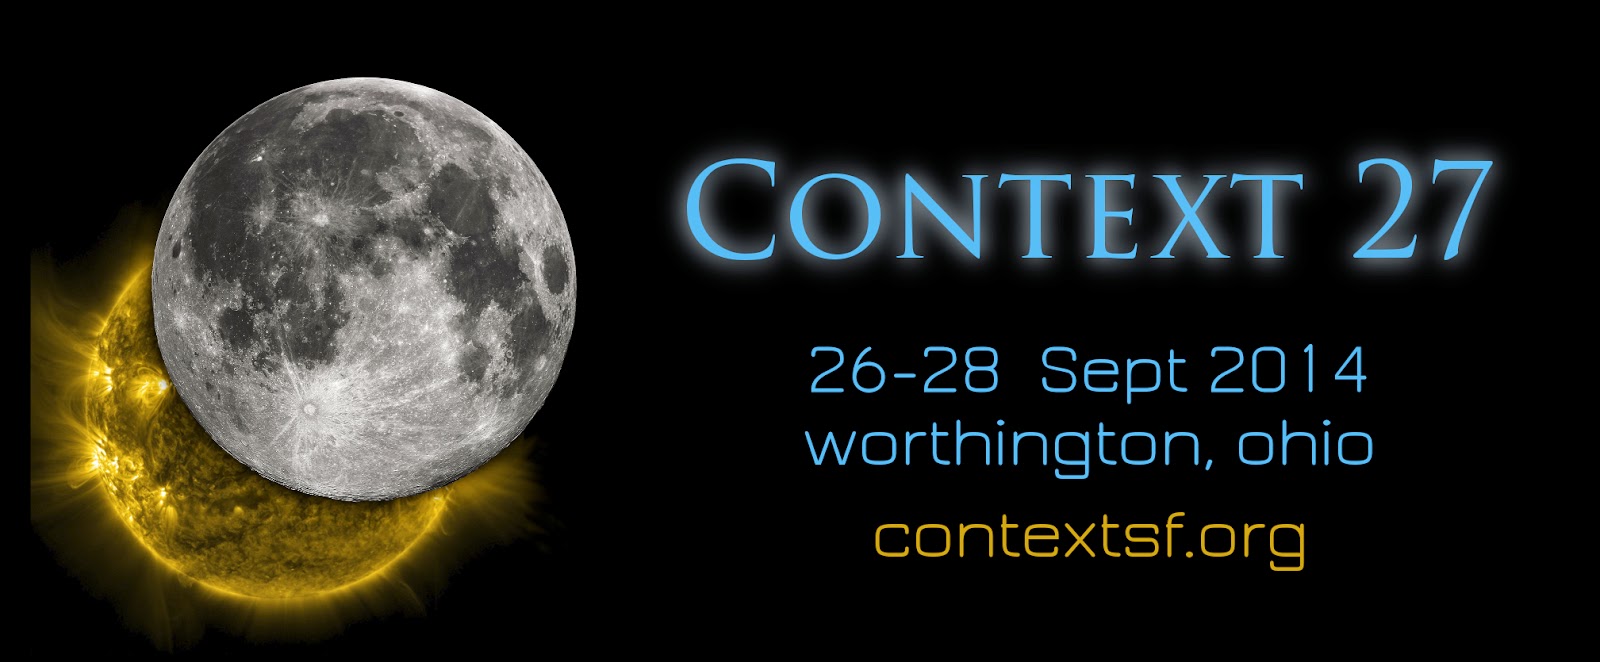 Remember – ONLINE registration for Context 27 ends today!